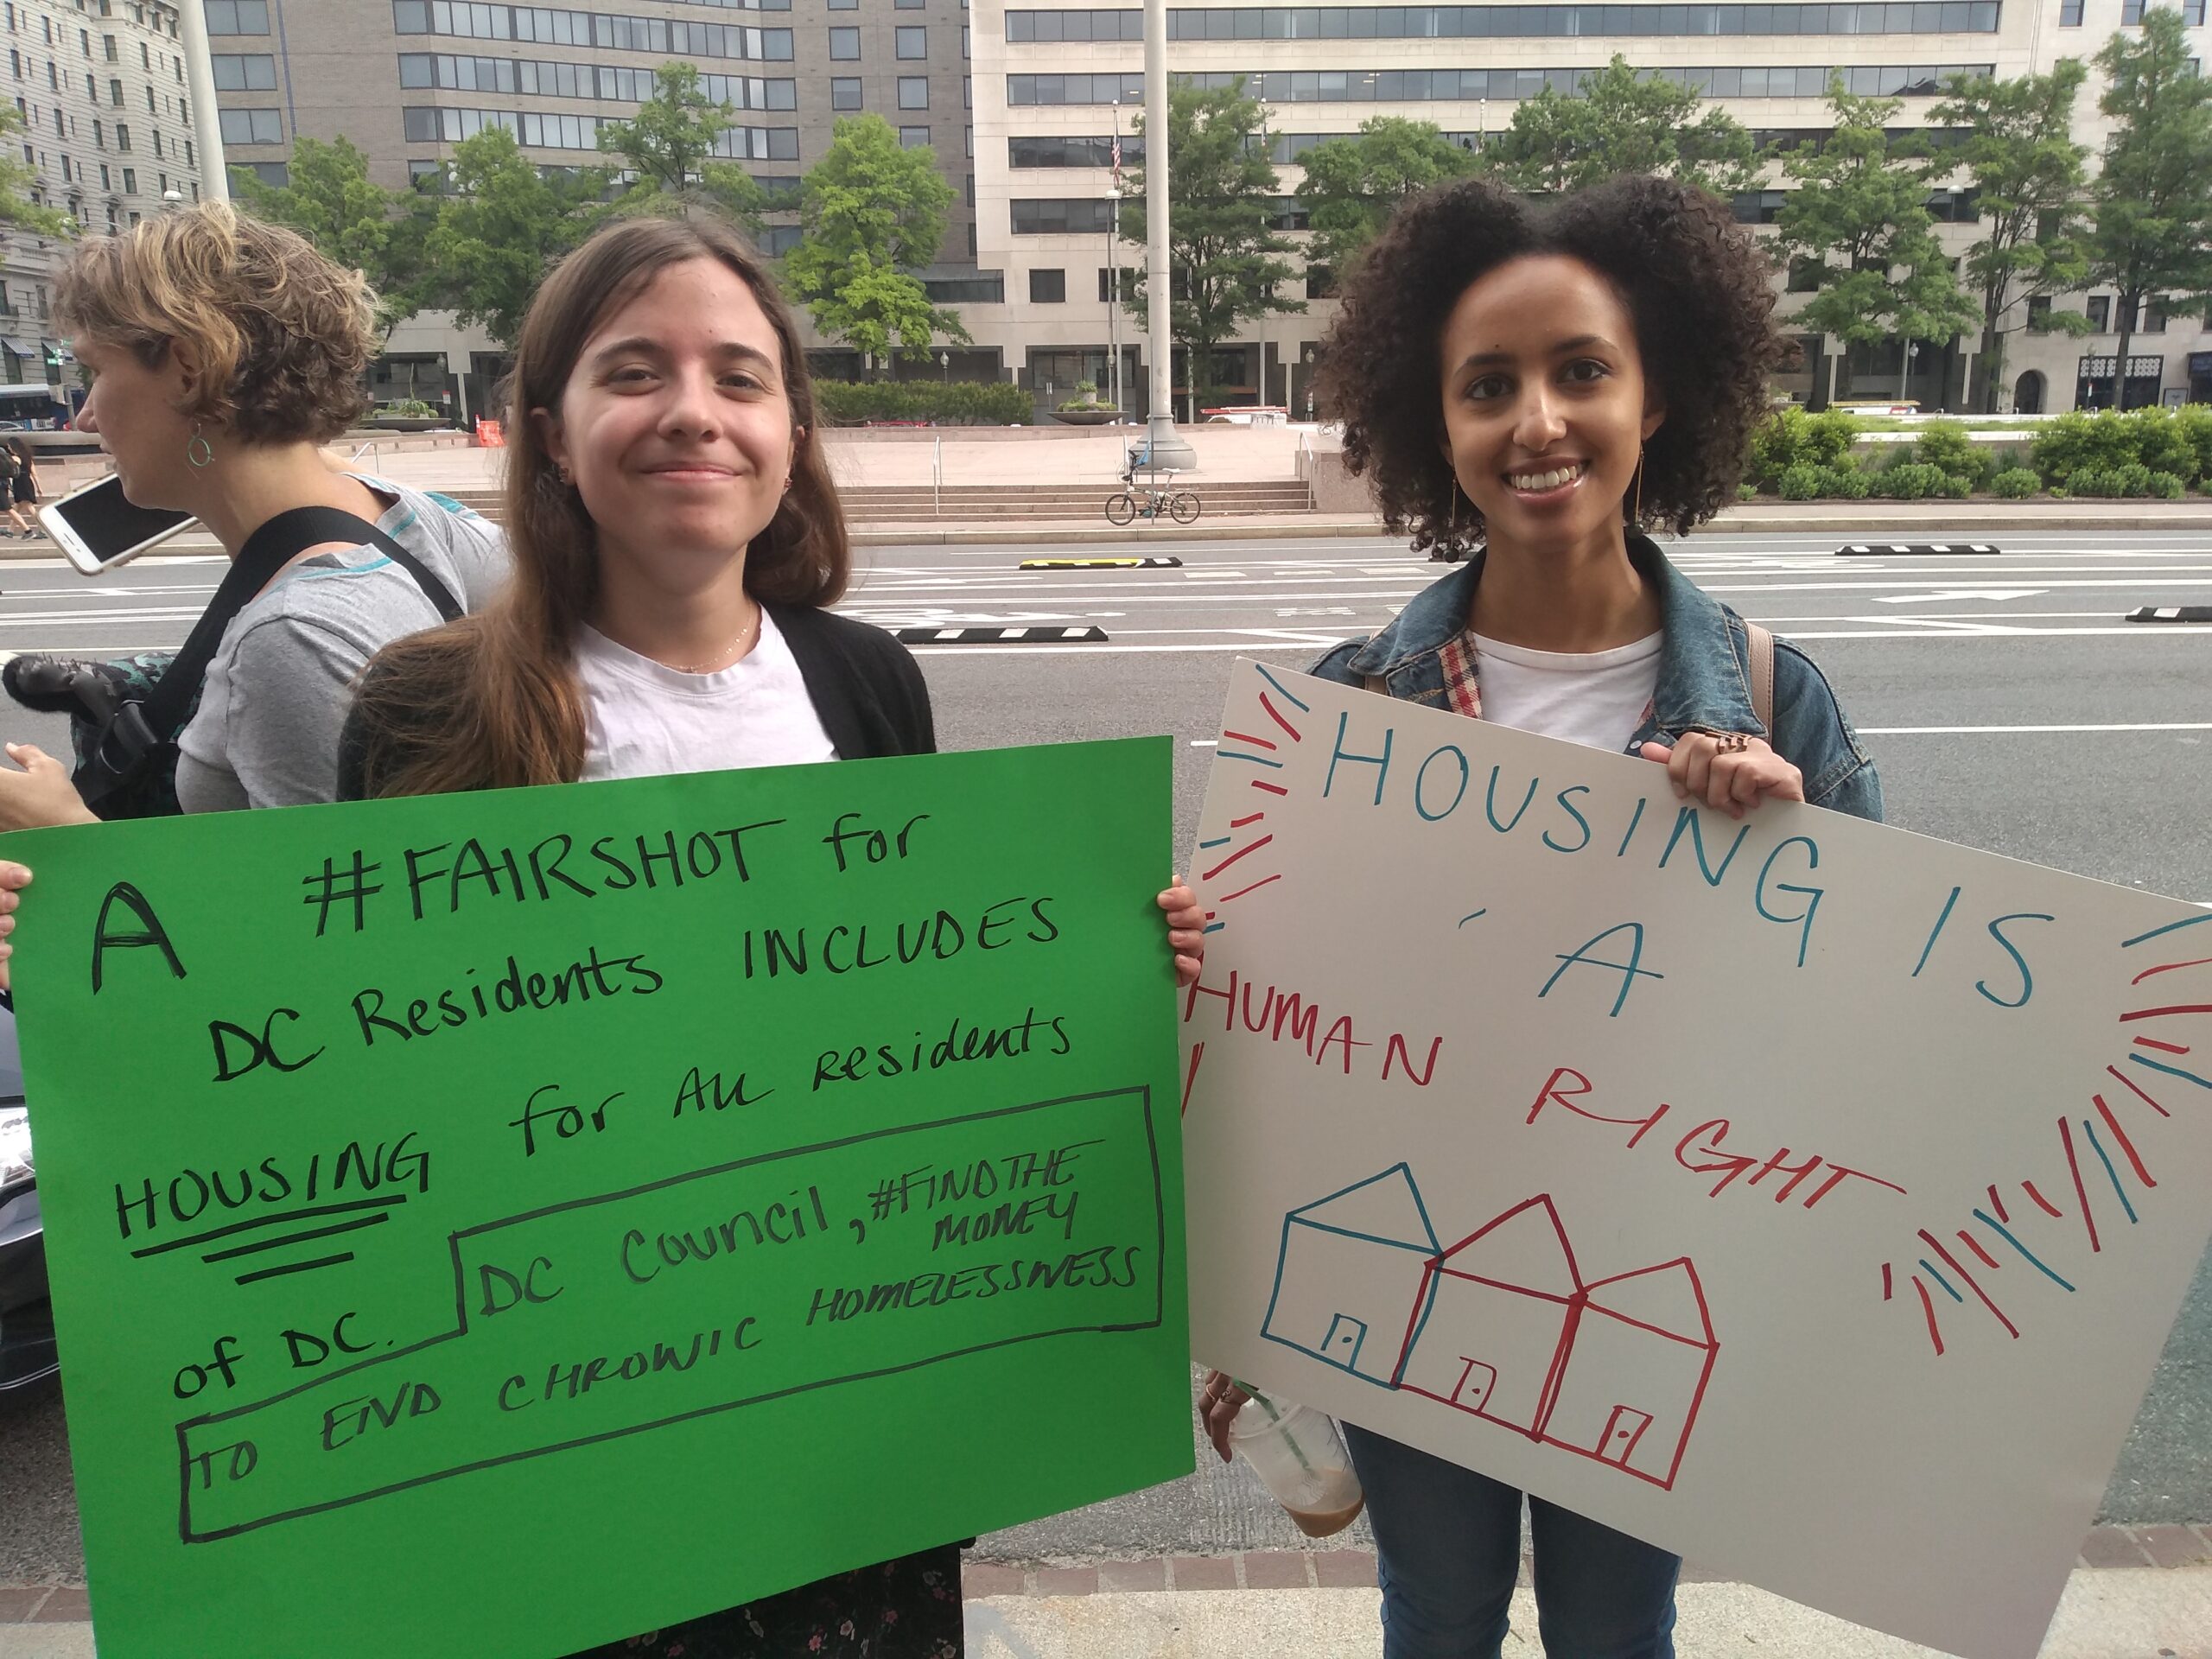 Photo of two advocates holding signs saying "A #FAIRSHOT for DC residents includes housing for all residents" and "Housing is a human right."